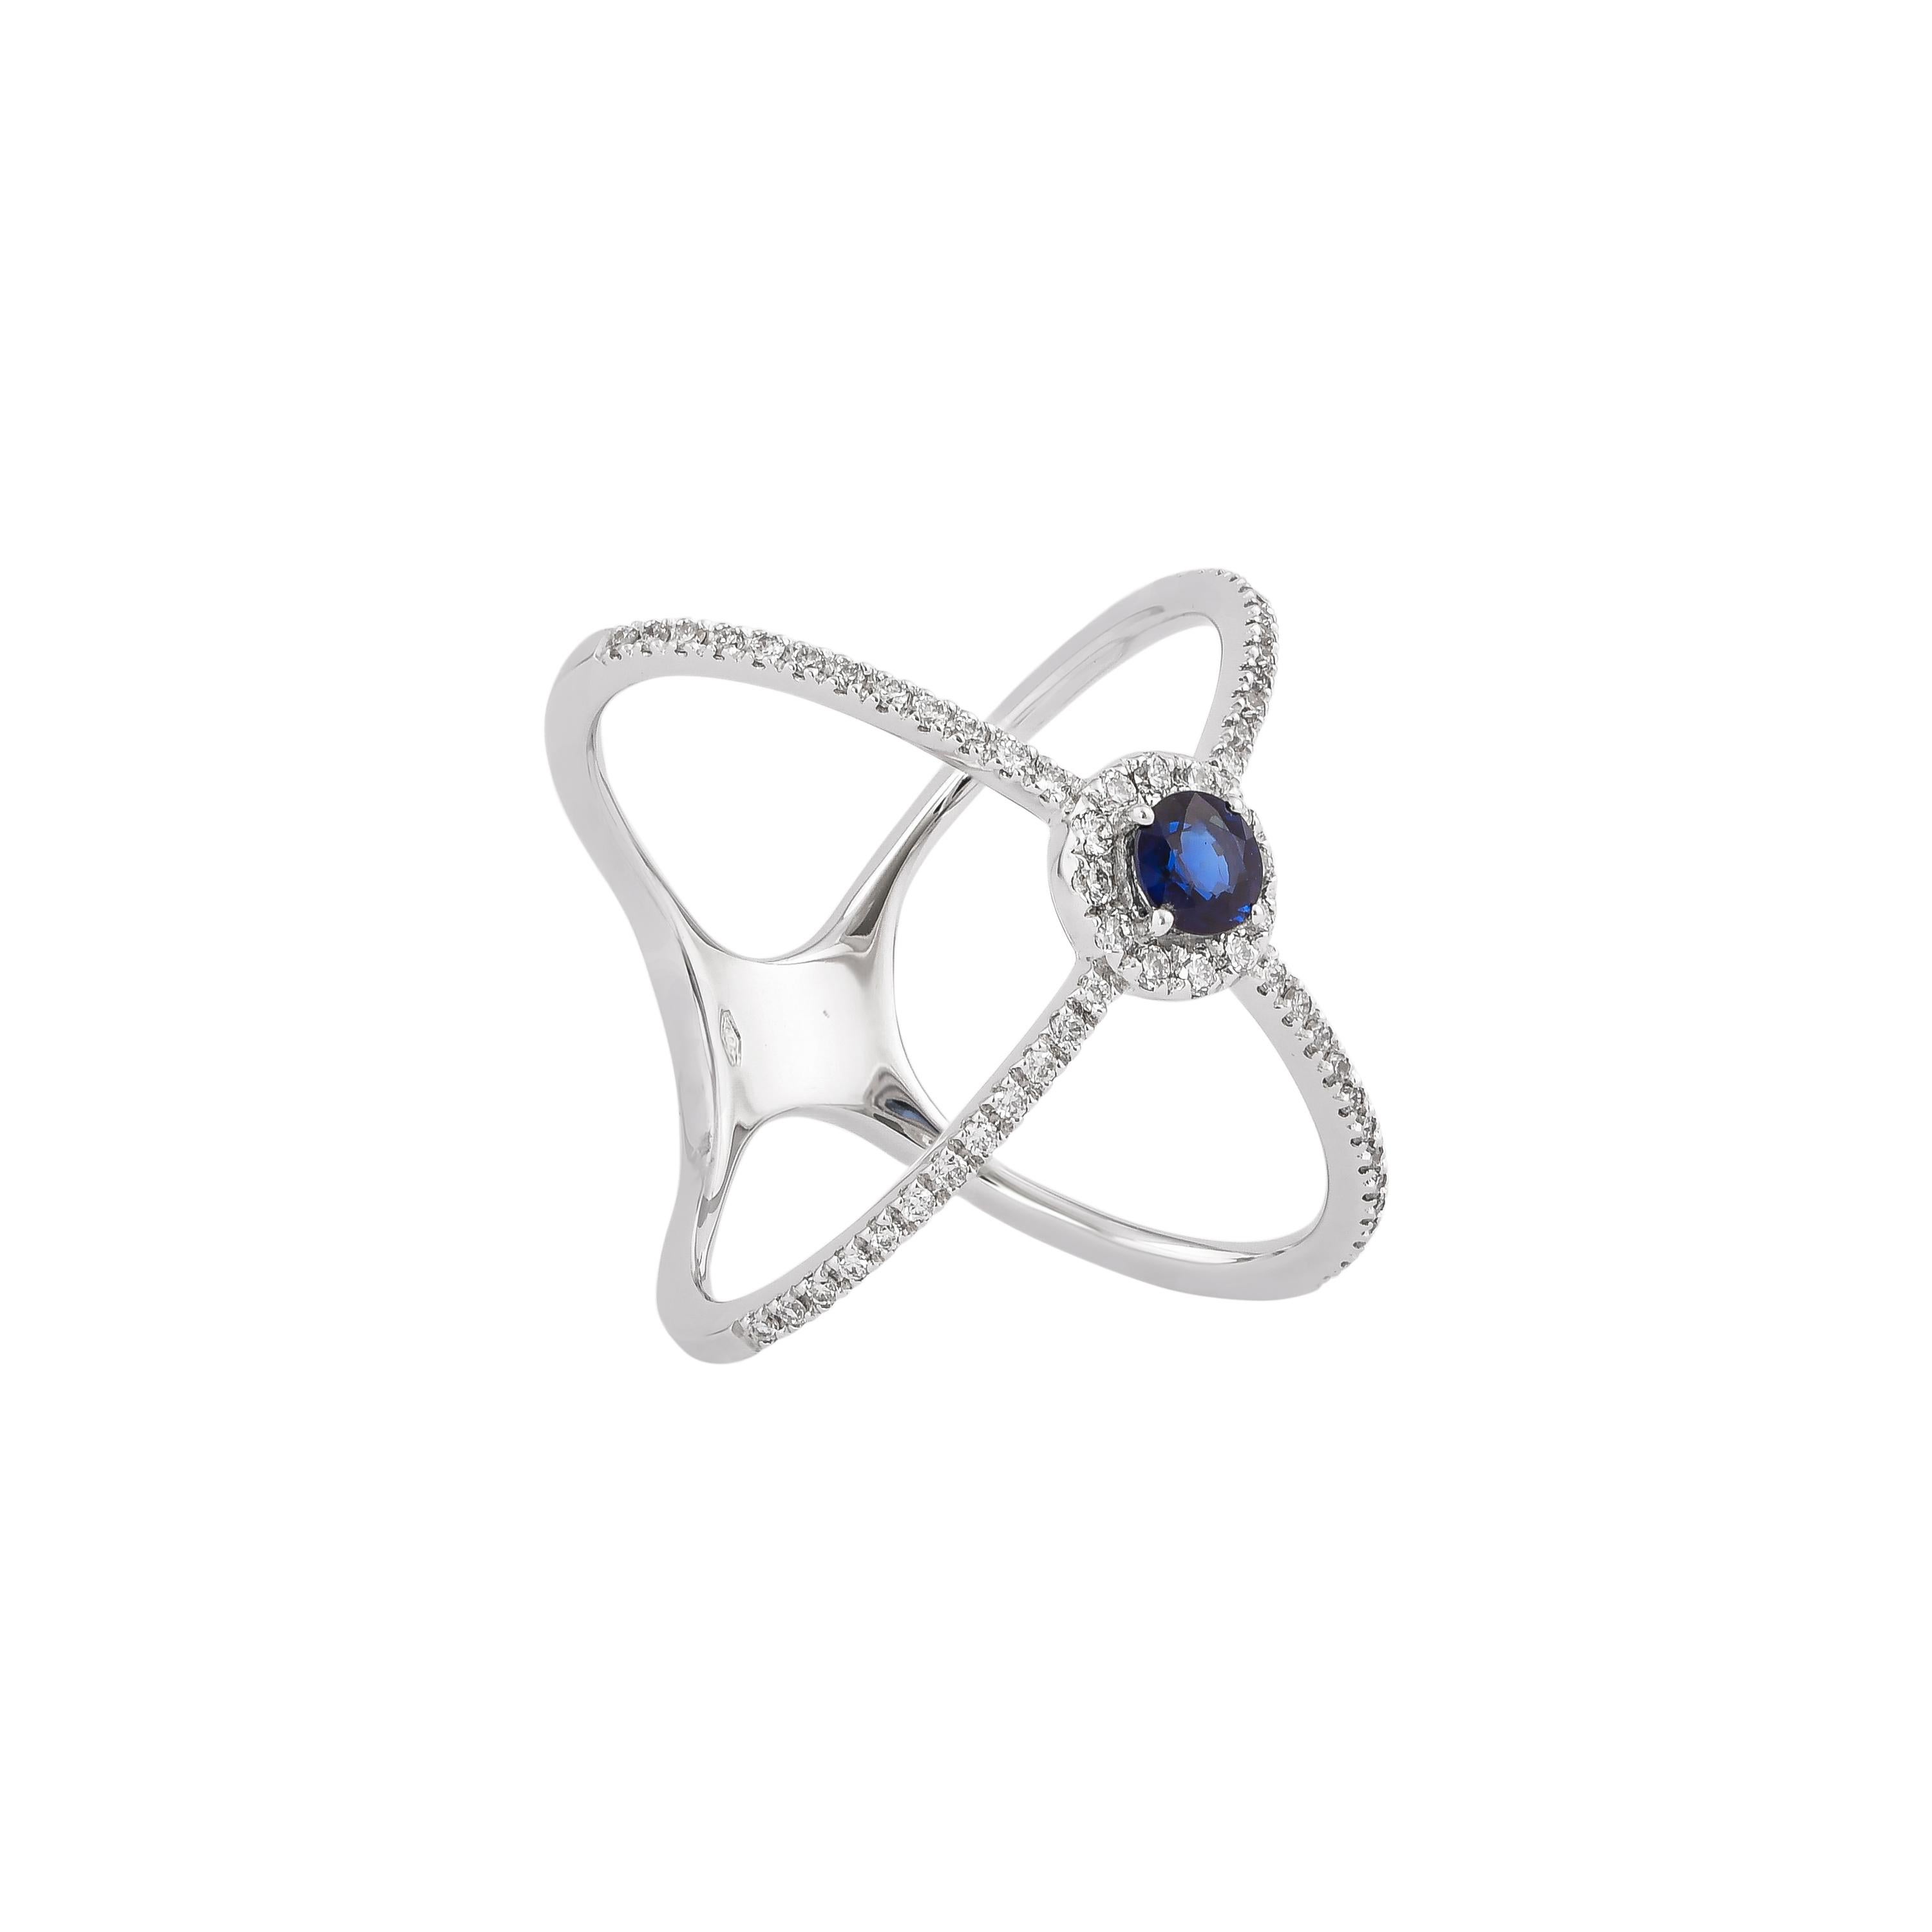 Unique and Designer Cocktail Rings by Sunita Nahata Fine Design.

Classic Blue Sapphire ring in 18K White gold with Diamond. 

Blue Sapphire: 0.36 carat, 4.00mm size, round shape. 
Diamond: 0.097 carat, 1.25mm size, round shape, G colour, VS